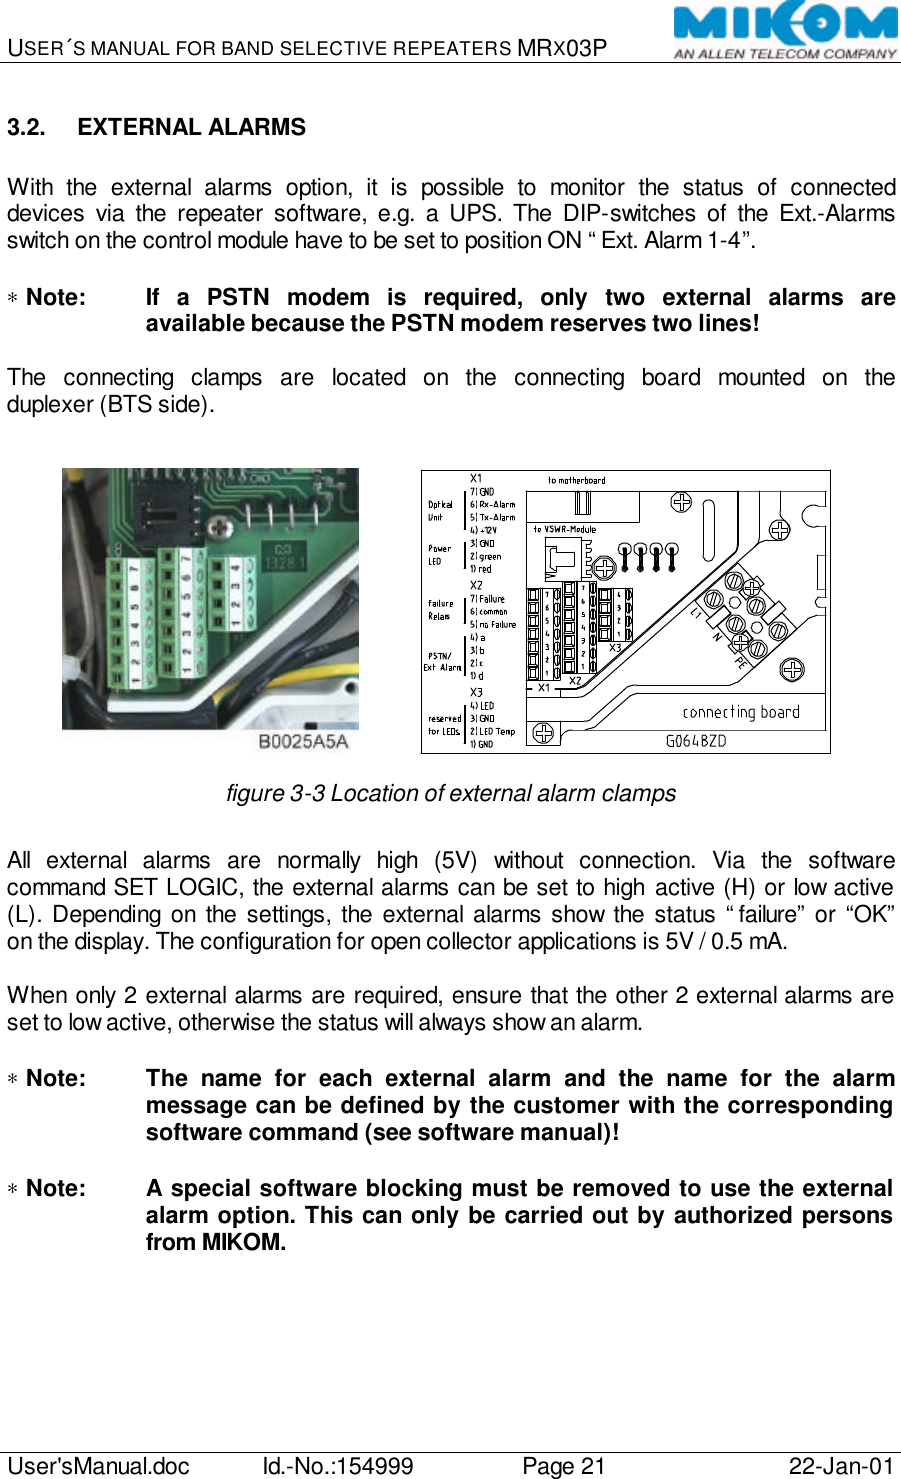 USER´S MANUAL FOR BAND SELECTIVE REPEATERS MRX03P   User&apos;sManual.doc Id.-No.:154999 Page 21 22-Jan-01  3.2. EXTERNAL ALARMS  With the external alarms option, it is possible to monitor the status of connected devices via the repeater software, e.g. a UPS. The DIP-switches of the Ext.-Alarms switch on the control module have to be set to position ON “Ext. Alarm 1-4”.  ∗ Note: If a PSTN modem is required, only two external alarms are available because the PSTN modem reserves two lines!  The connecting clamps are located on the connecting board mounted on the duplexer (BTS side).              figure 3-3 Location of external alarm clamps  All external alarms are normally high (5V) without connection. Via the software command SET LOGIC, the external alarms can be set to high active (H) or low active (L). Depending on the settings, the external alarms show the status “failure” or “OK” on the display. The configuration for open collector applications is 5V / 0.5 mA.  When only 2 external alarms are required, ensure that the other 2 external alarms are set to low active, otherwise the status will always show an alarm.  ∗ Note: The name for each external alarm and the name for the alarm message can be defined by the customer with the corresponding software command (see software manual)!  ∗ Note: A special software blocking must be removed to use the external alarm option. This can only be carried out by authorized persons from MIKOM.  